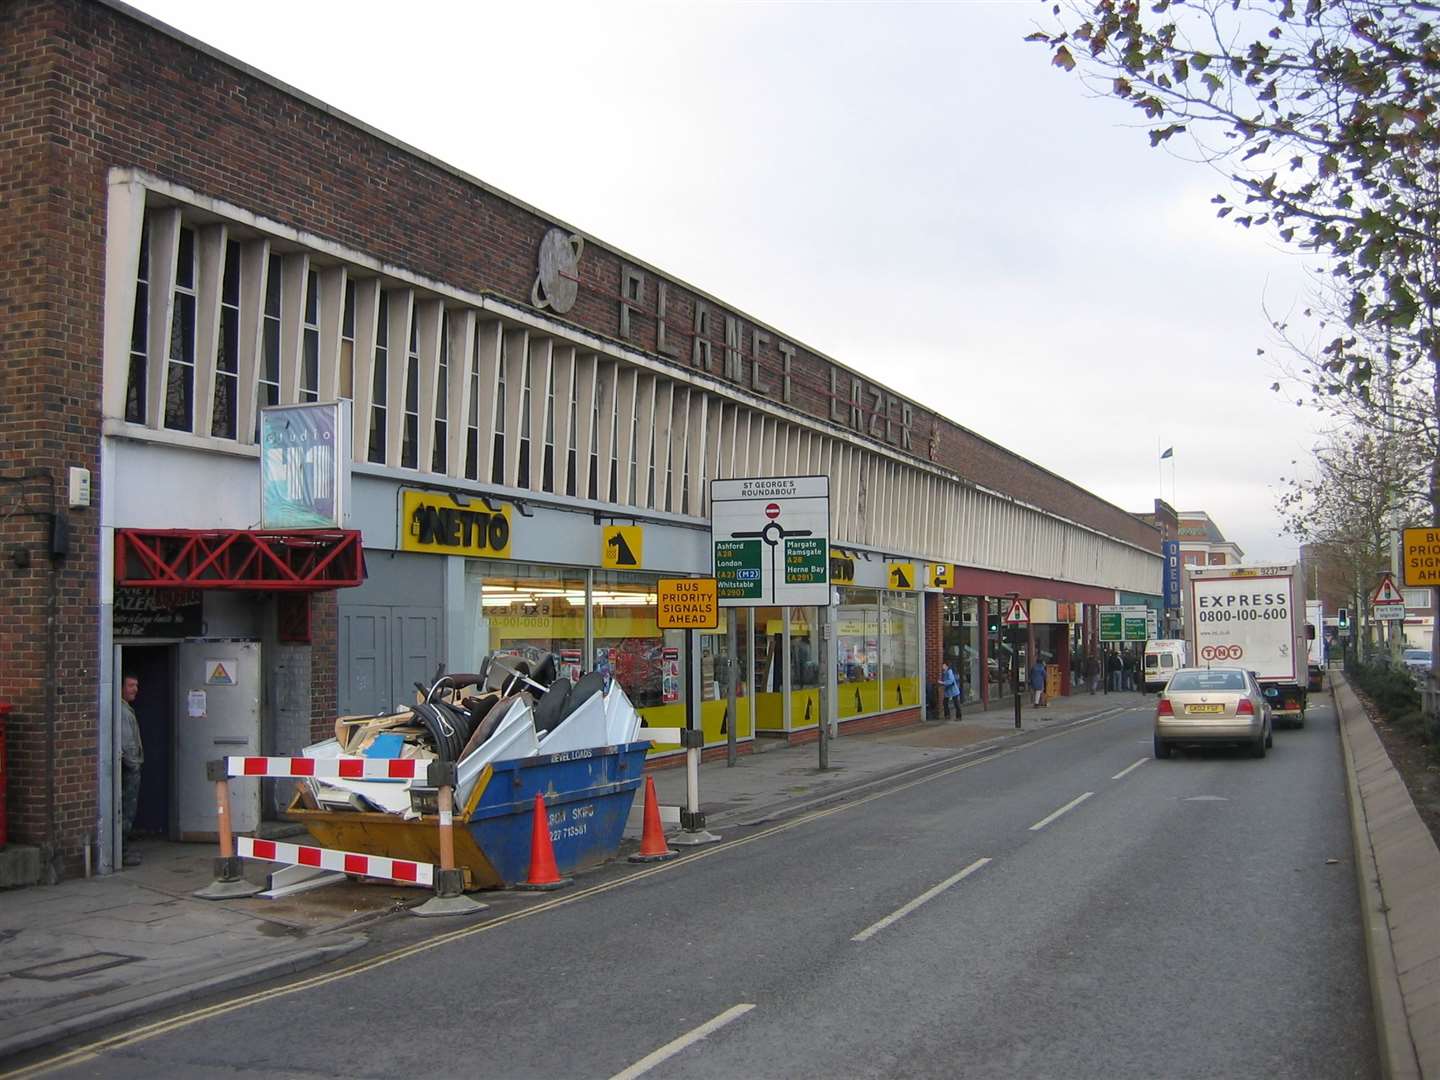 The site of Studio 41 was eventually knocked down and turned into flats